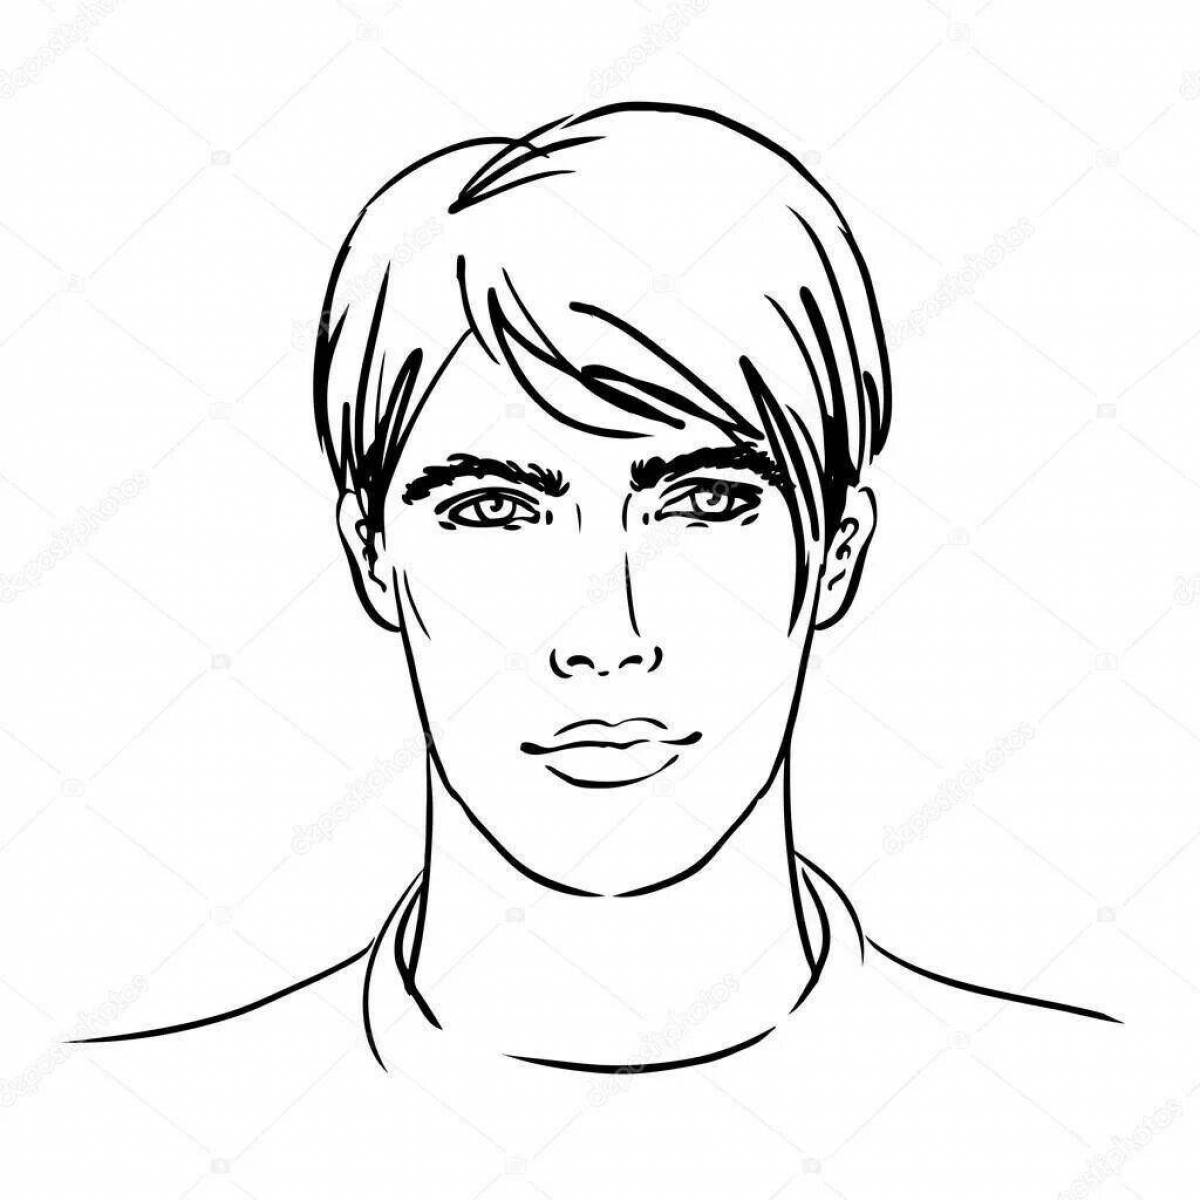 Coloring page graceful male face